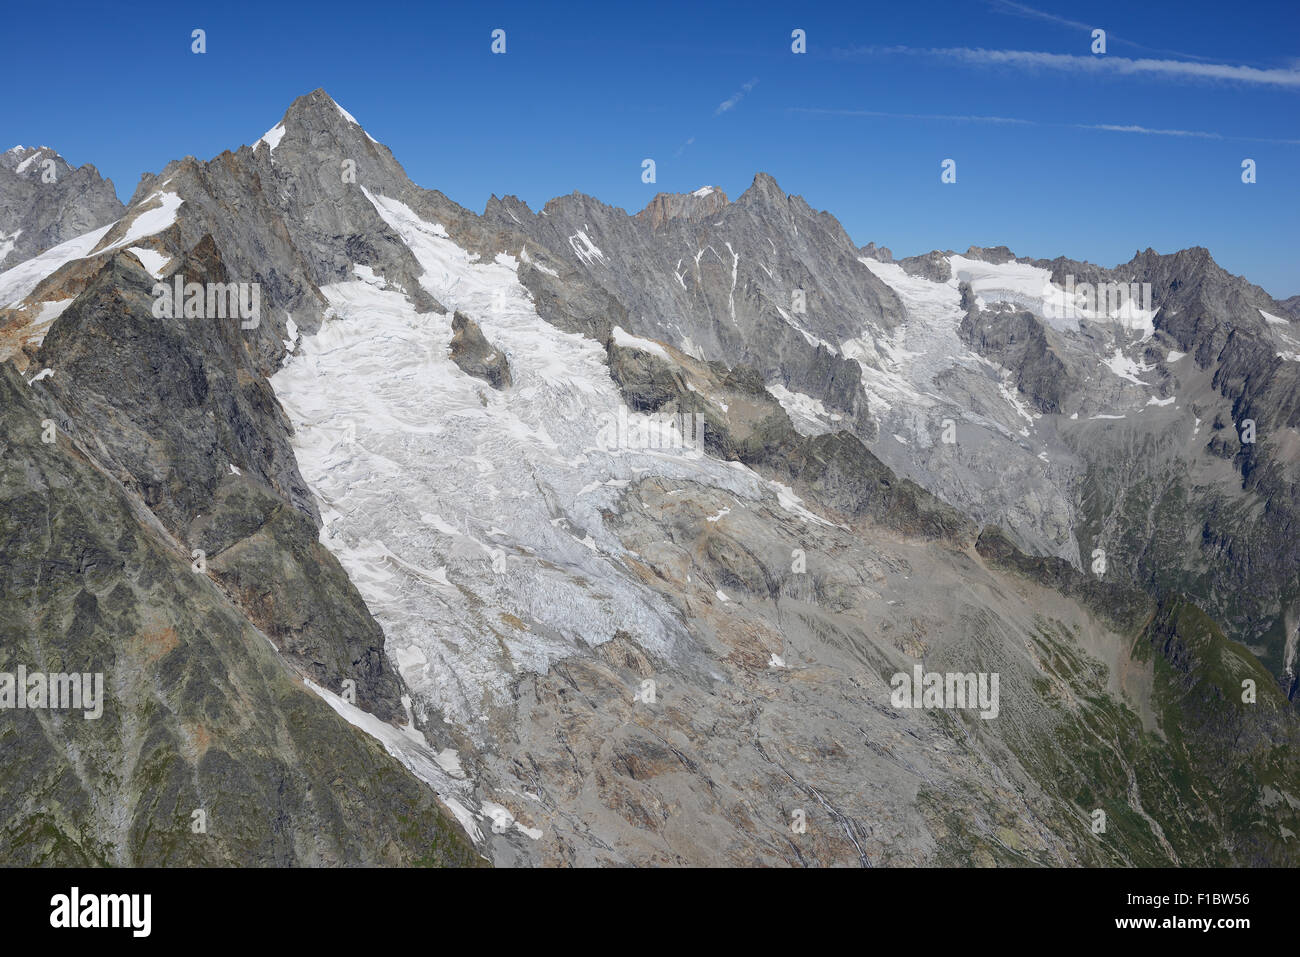 AERIAL VIEW. Tripoint of France, Italy and Switzerland at the summit of Mont Dolent. Swiss side of the mountain, Mont Blanc Massif. Stock Photo